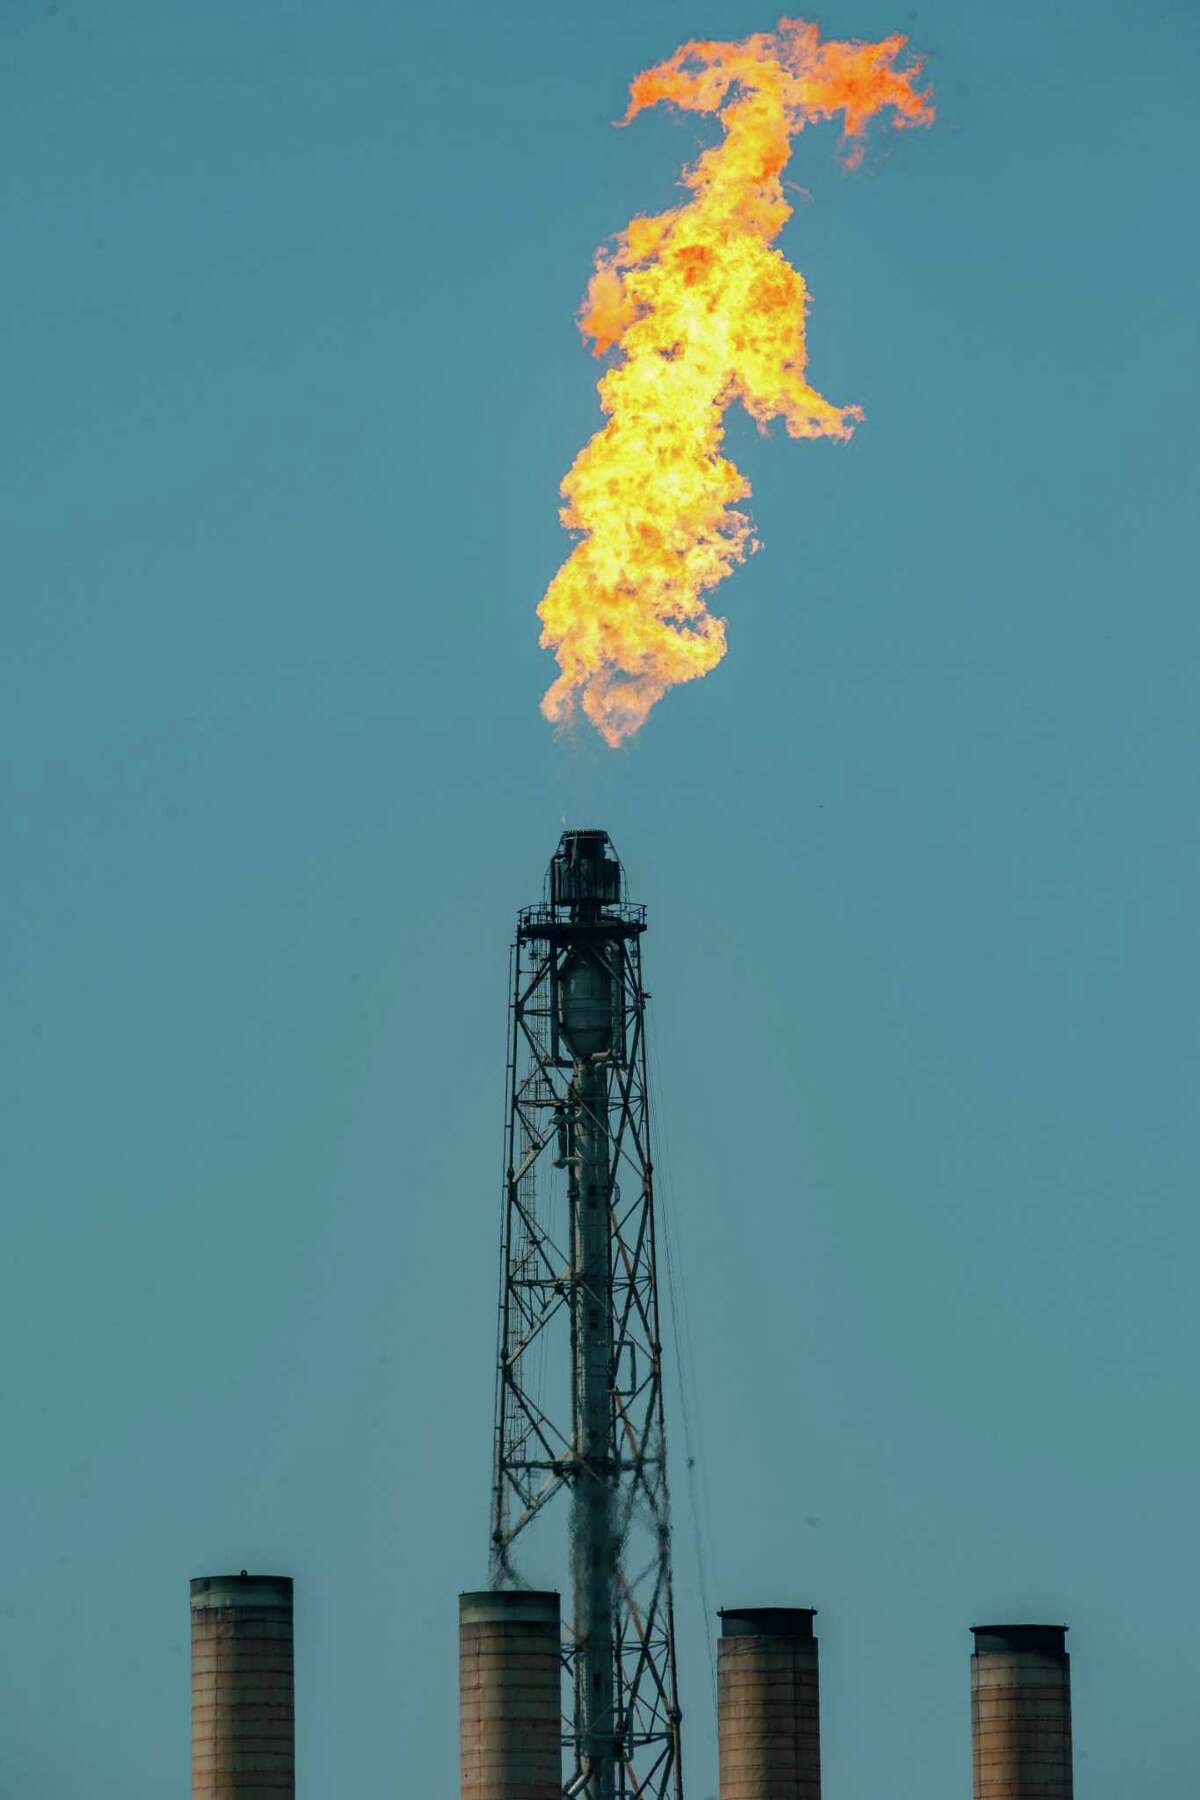 Over the weekend, flaring was a problem at some of the area plants like this one at Chevron Phillips in Port Arthur. Photo made on October 12, 2020. Fran Ruchalski/The Enterprise